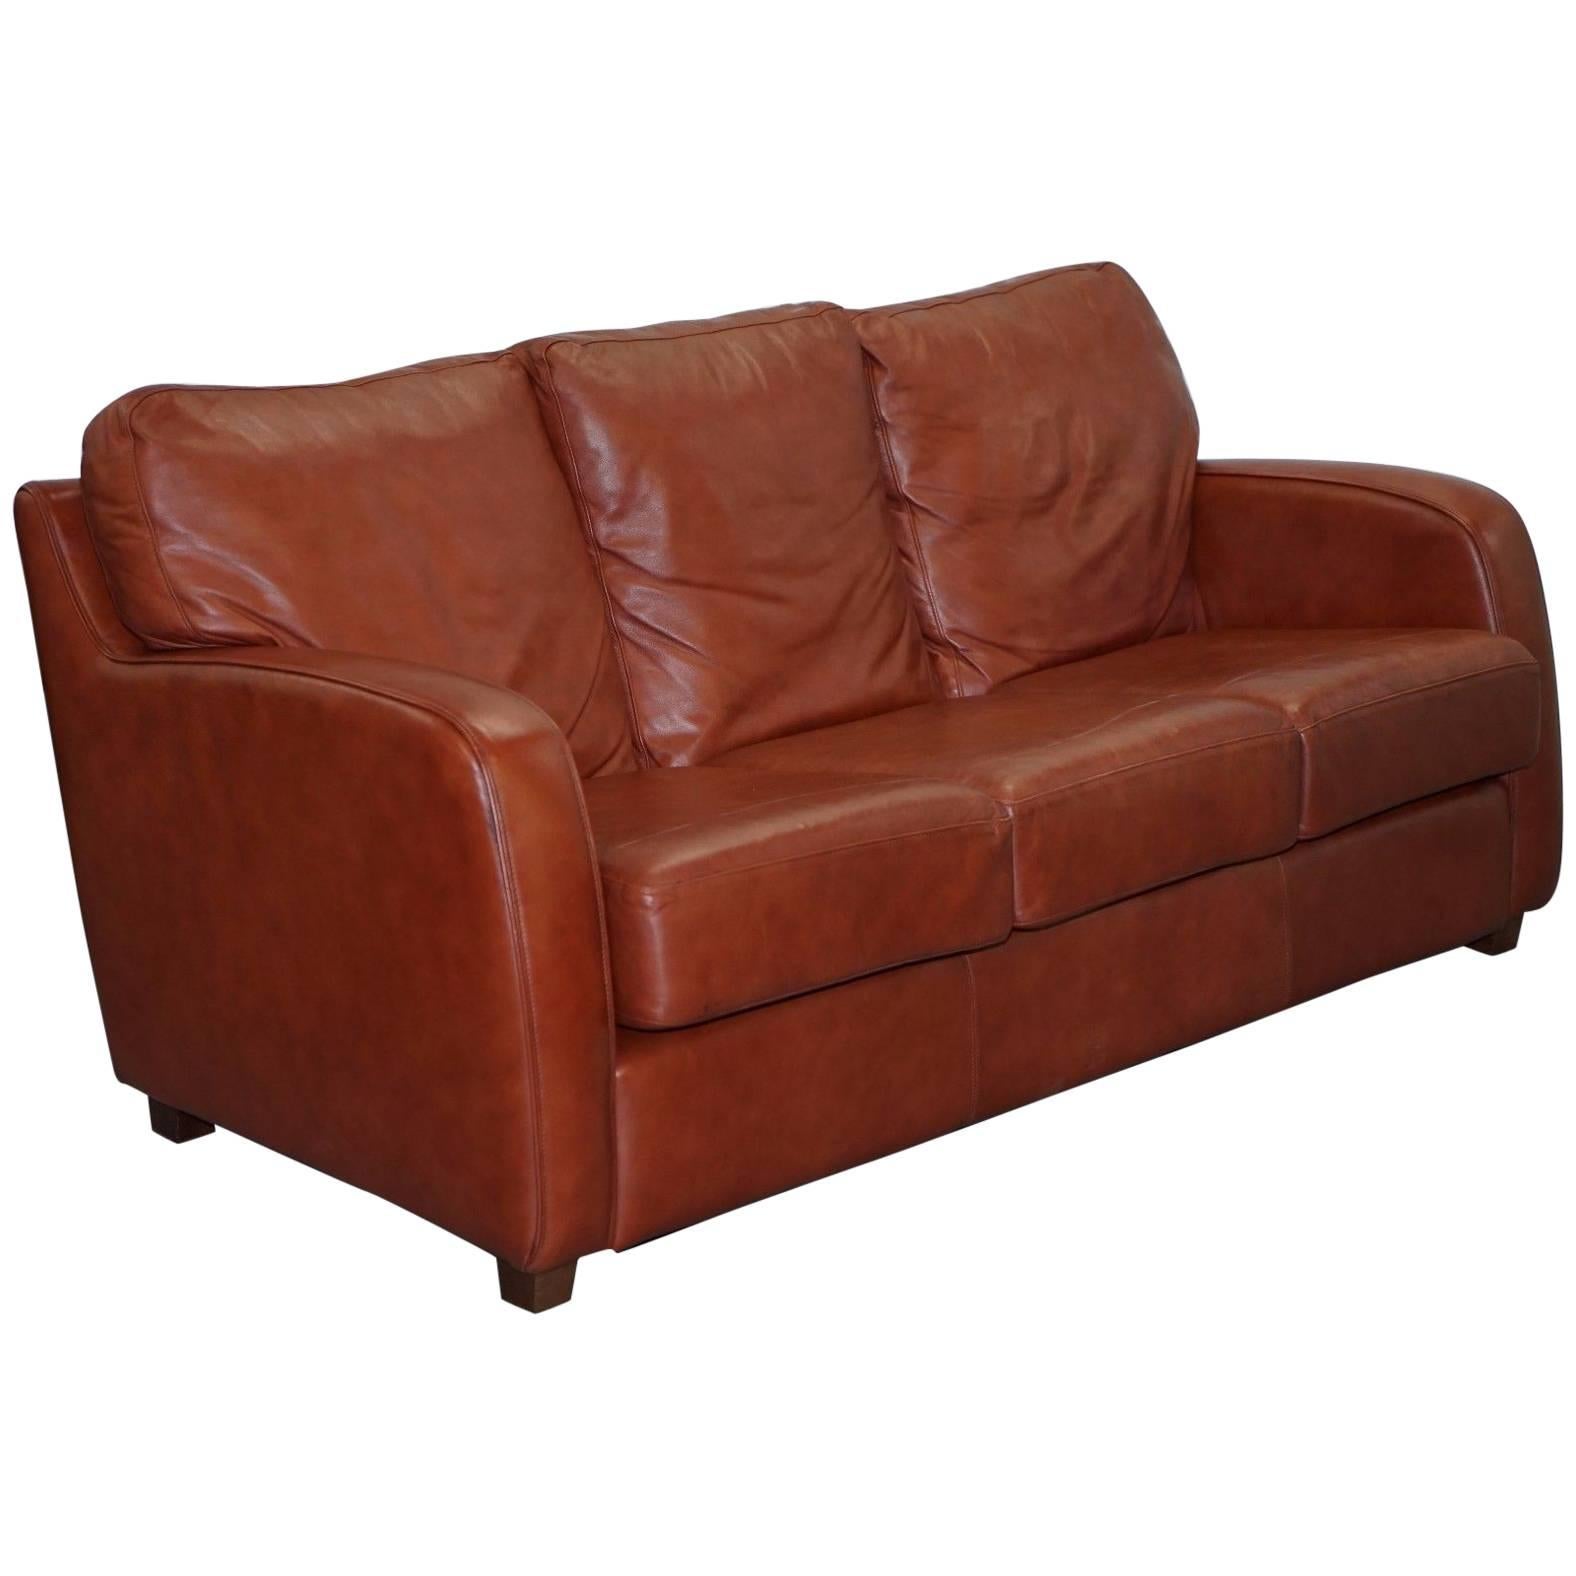 Lovely Aged Chestnut Brown Leather Three-Seat Sofa Great Color and Comfortable